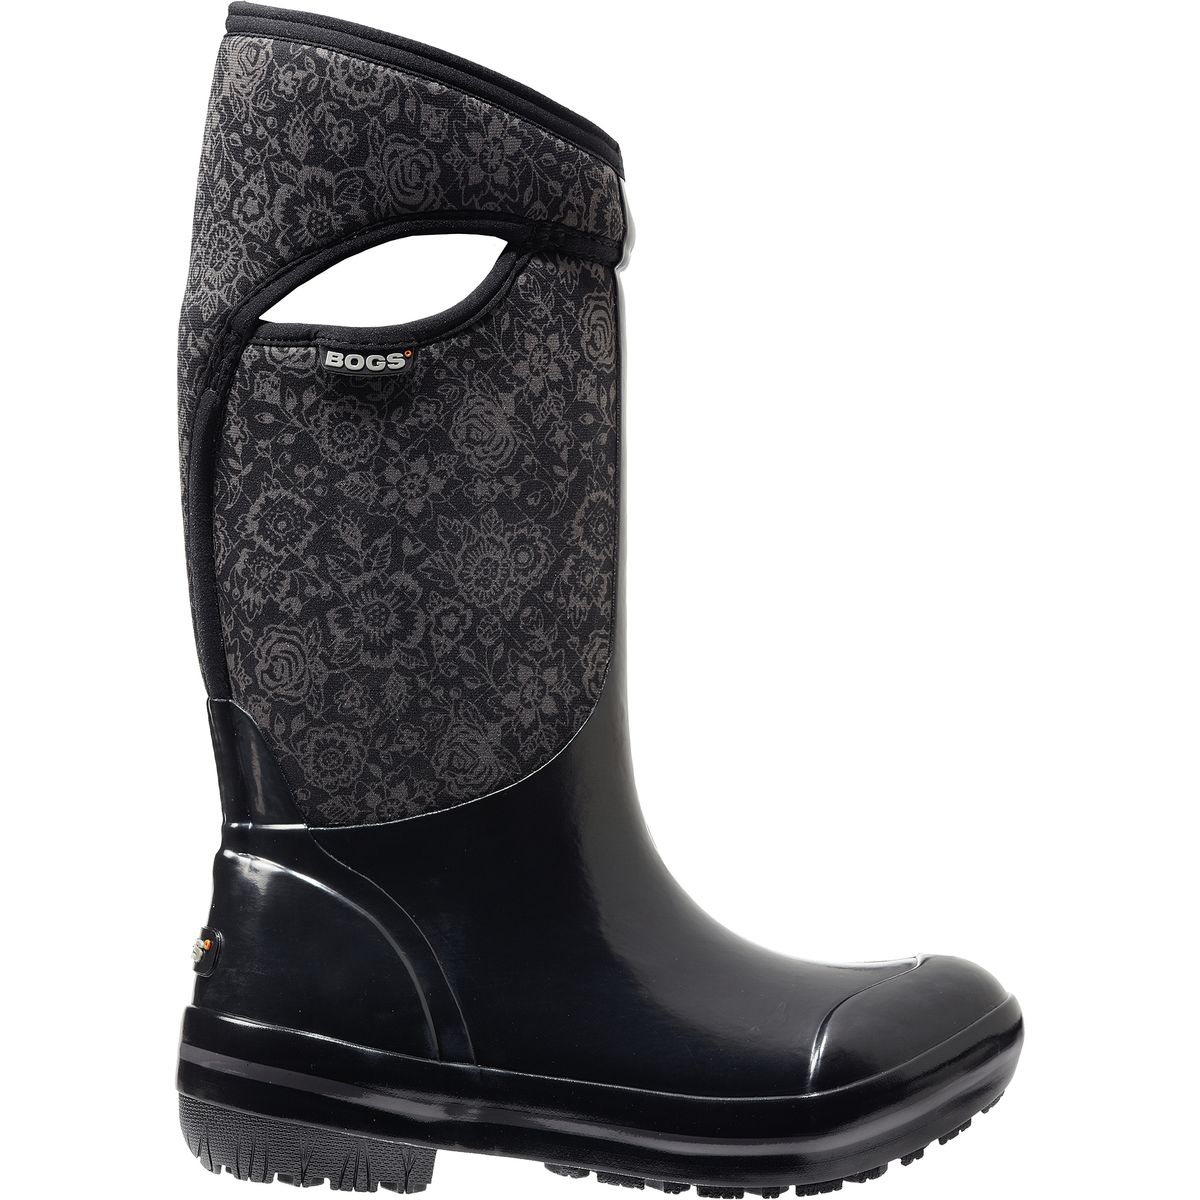 Bogs Plimsoll Quilted Floral Tall Boot - Women's - Footwear